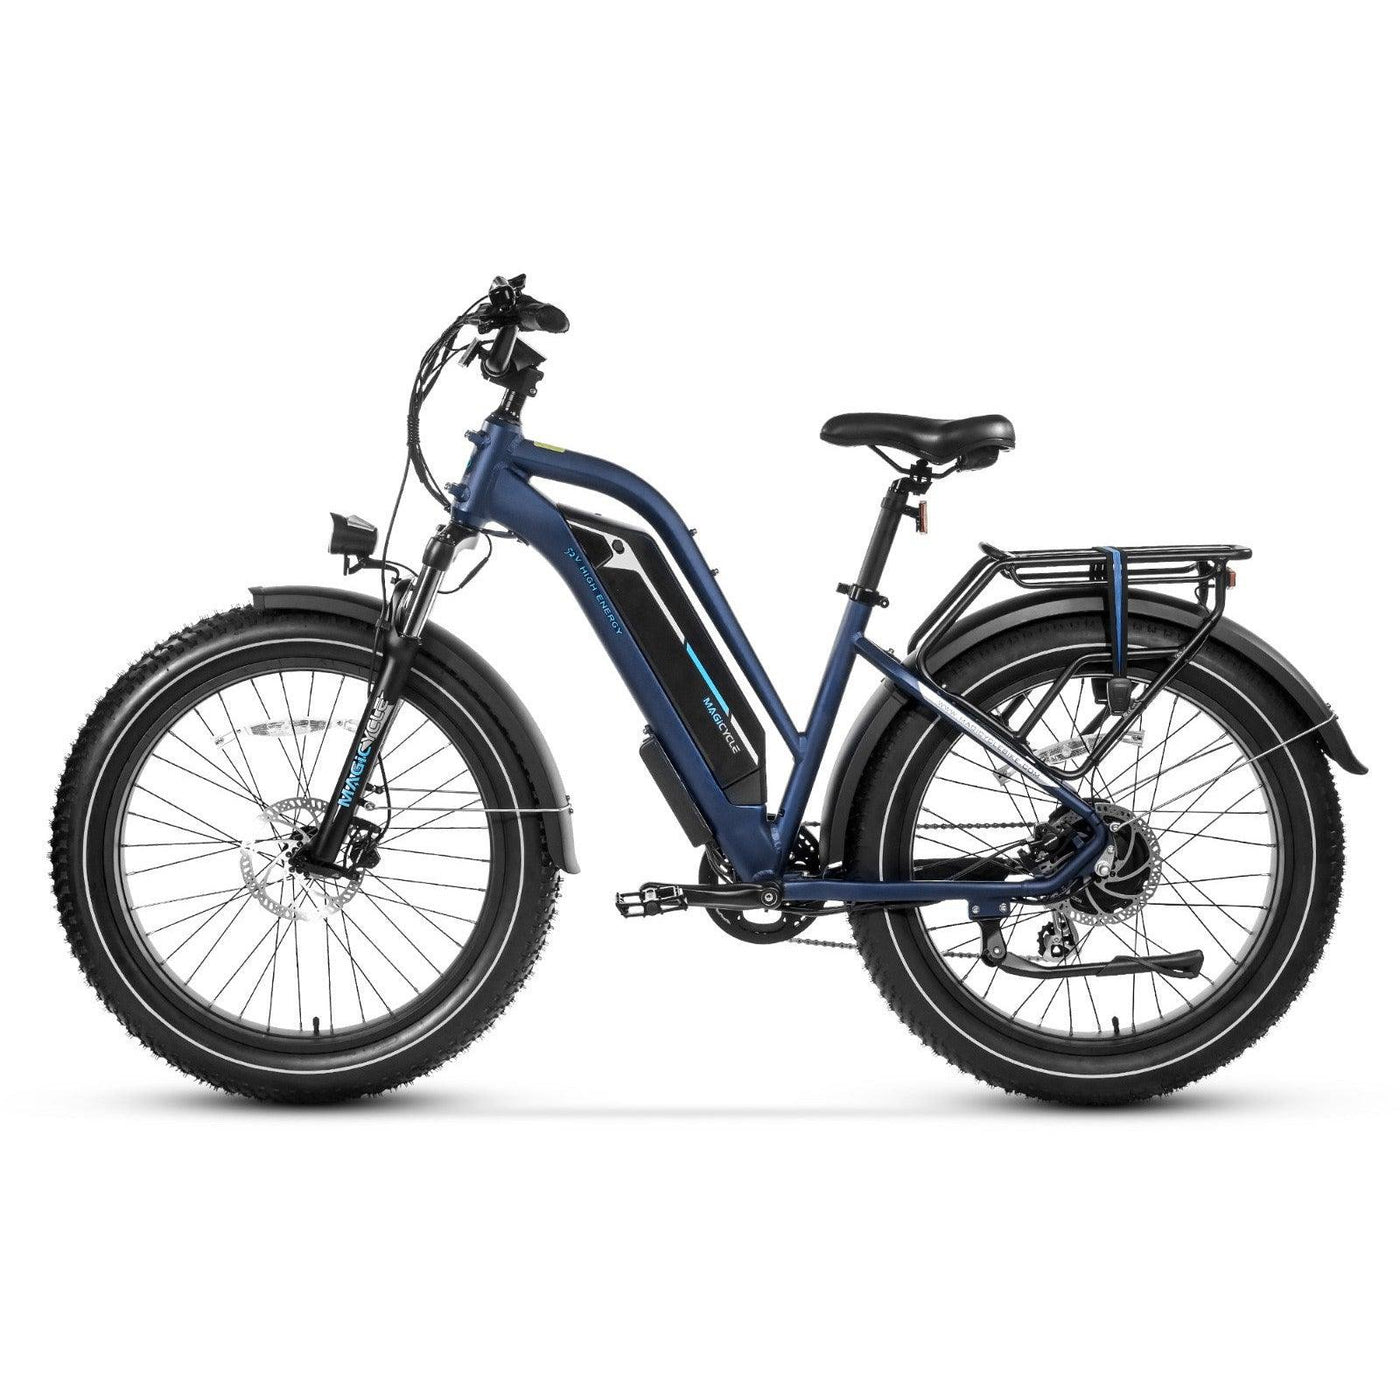 MagiCycle 52V 20AH Cruiser Pro Step Over Electric Bike - Rider Cycles 